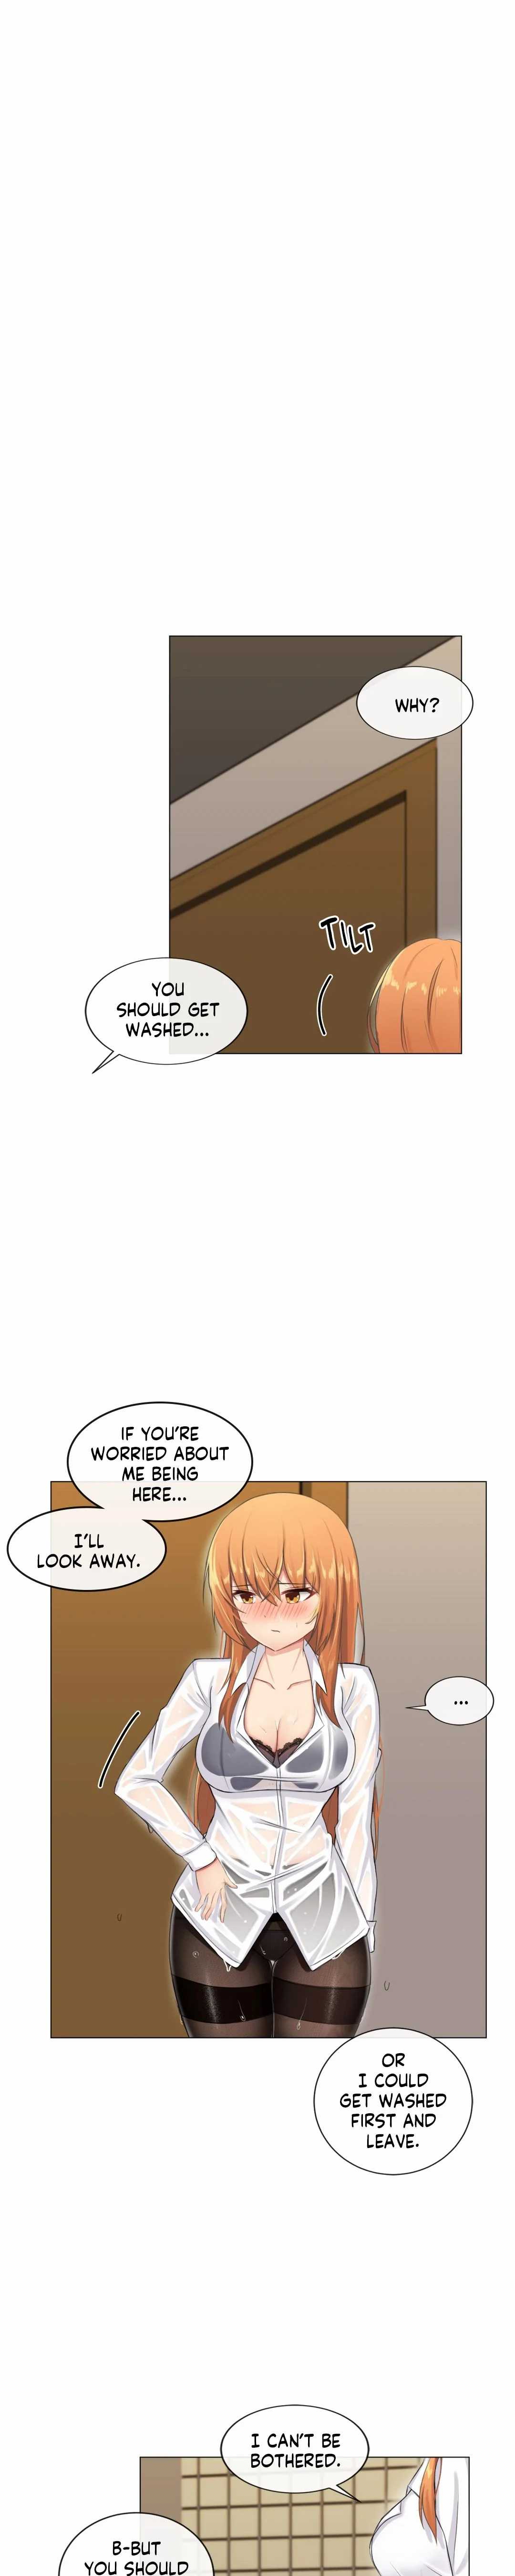 [Dumangoon, 130F] Sexcape Room: Pile Up Ch.9/9 [English] [Manhwa PDF] Completed